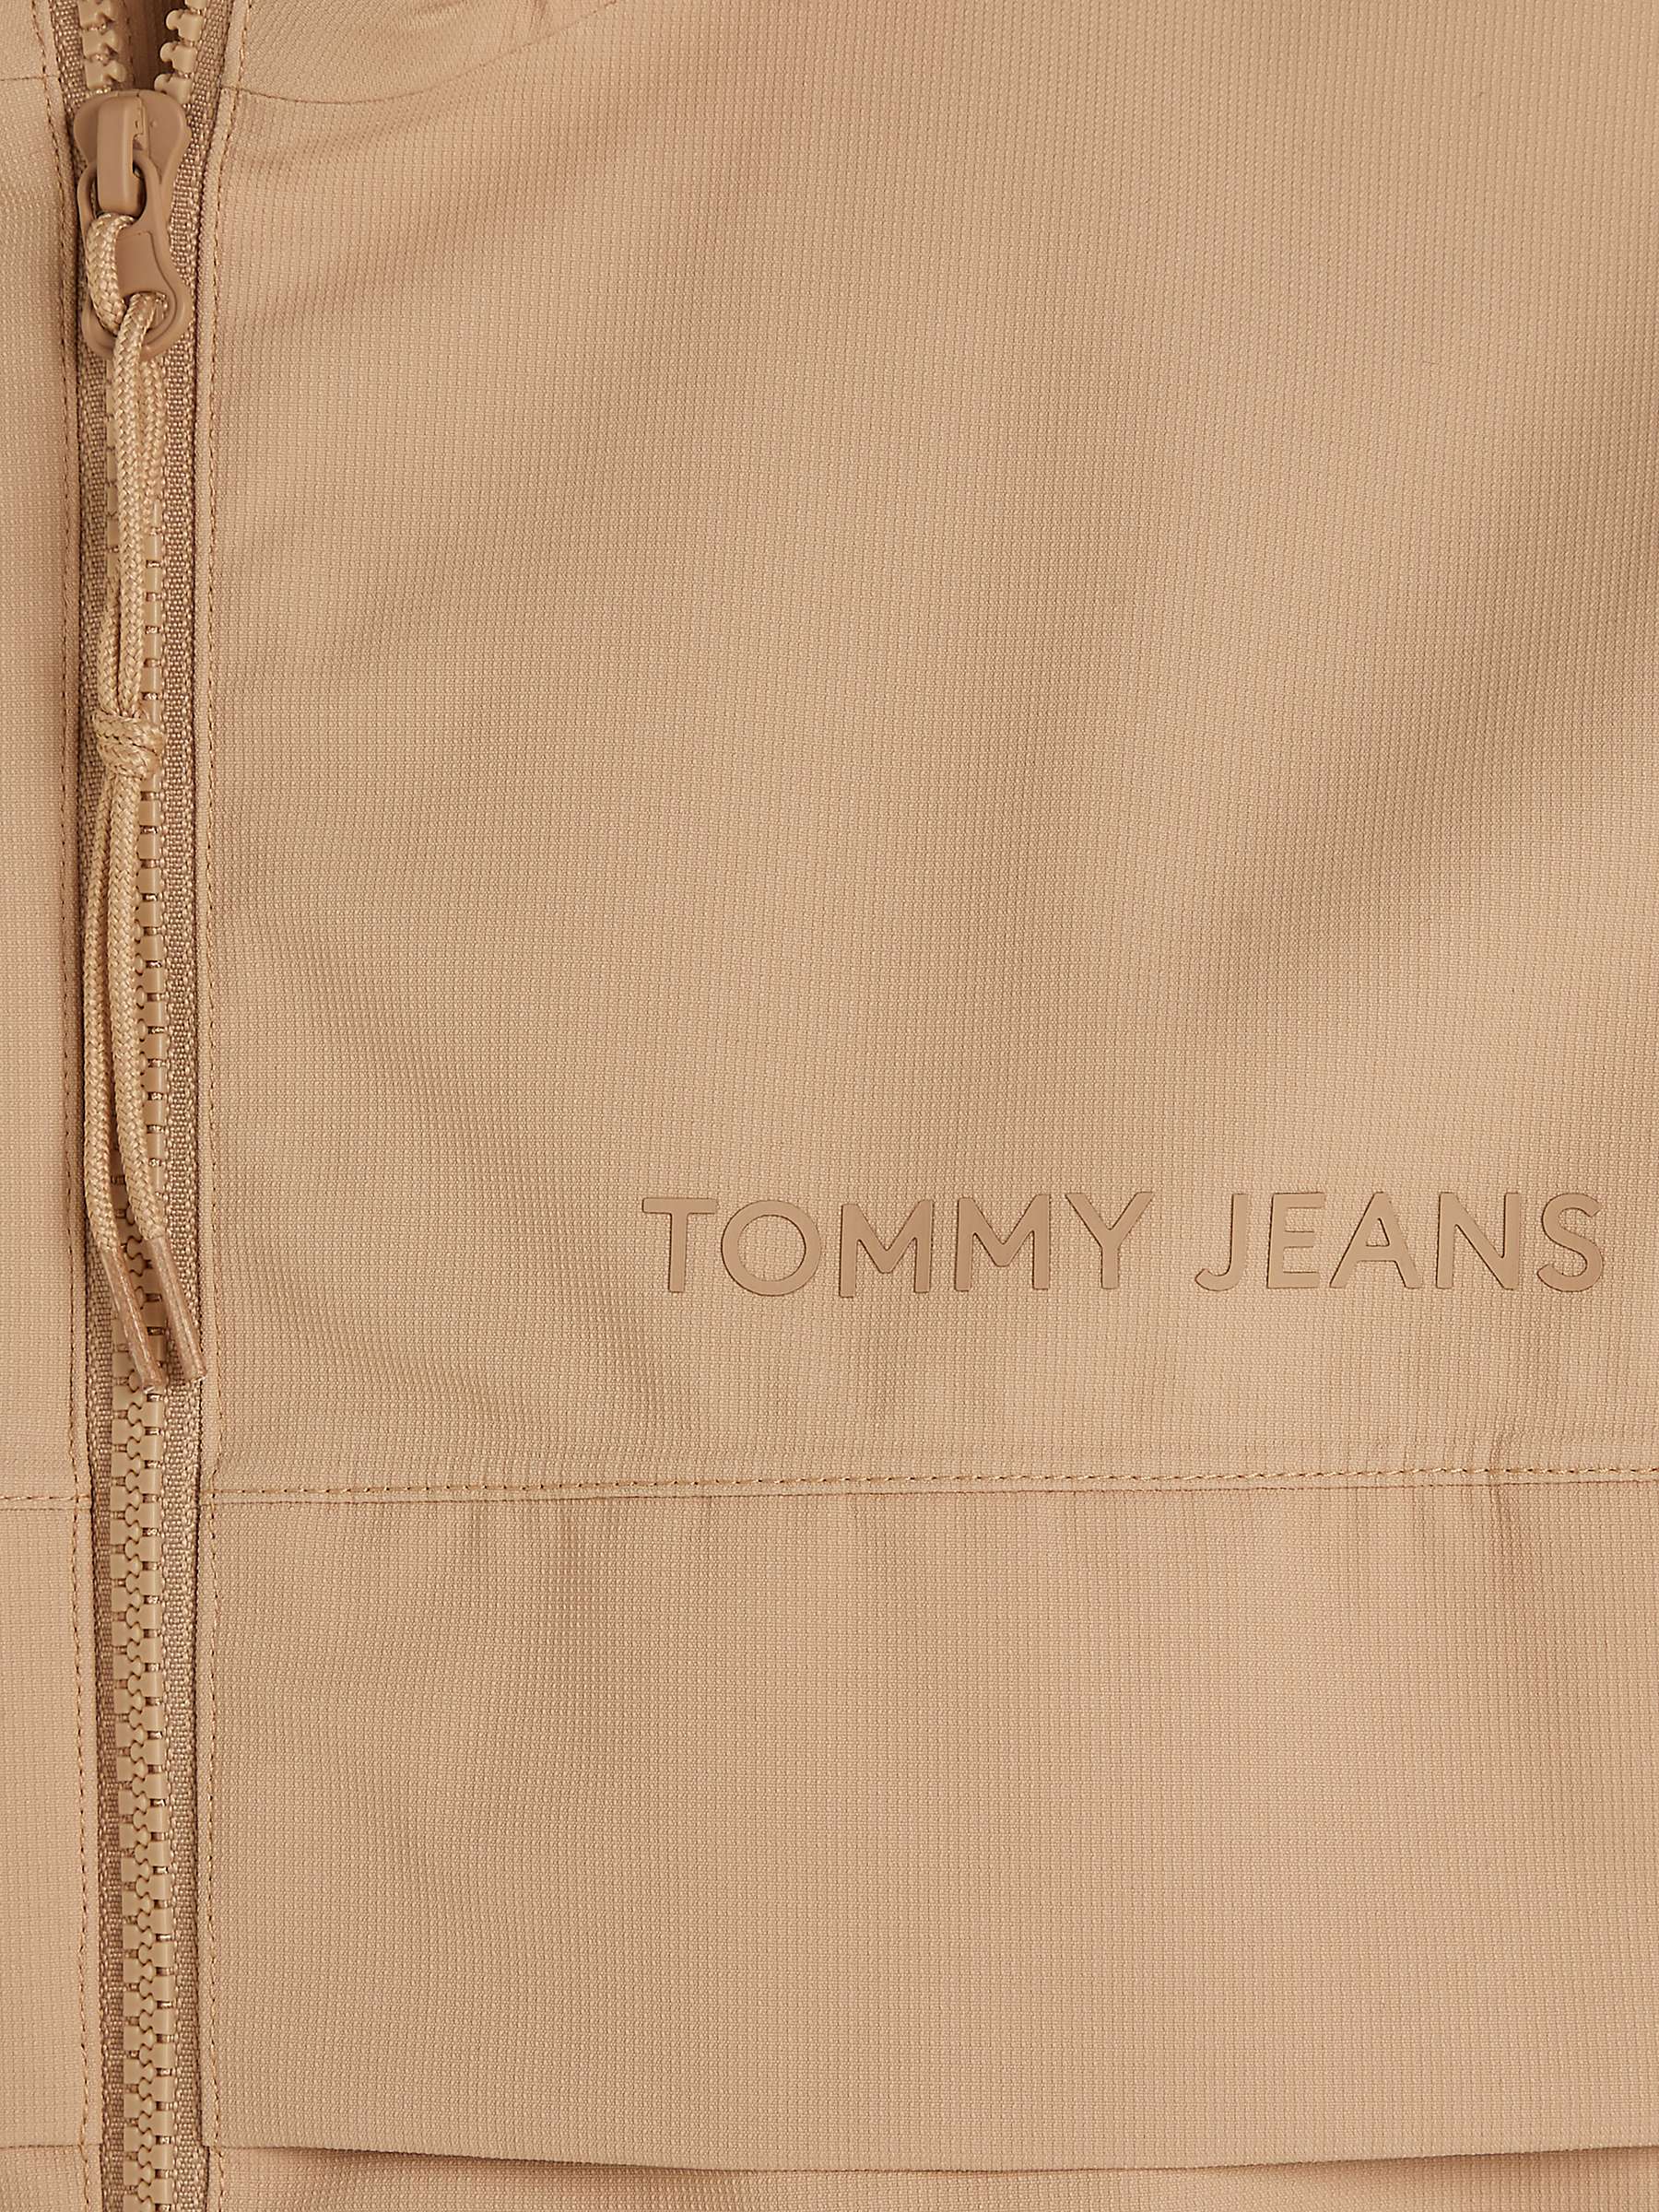 Buy Tommy Jeans Tech Outdoor Chicago Jacket Online at johnlewis.com